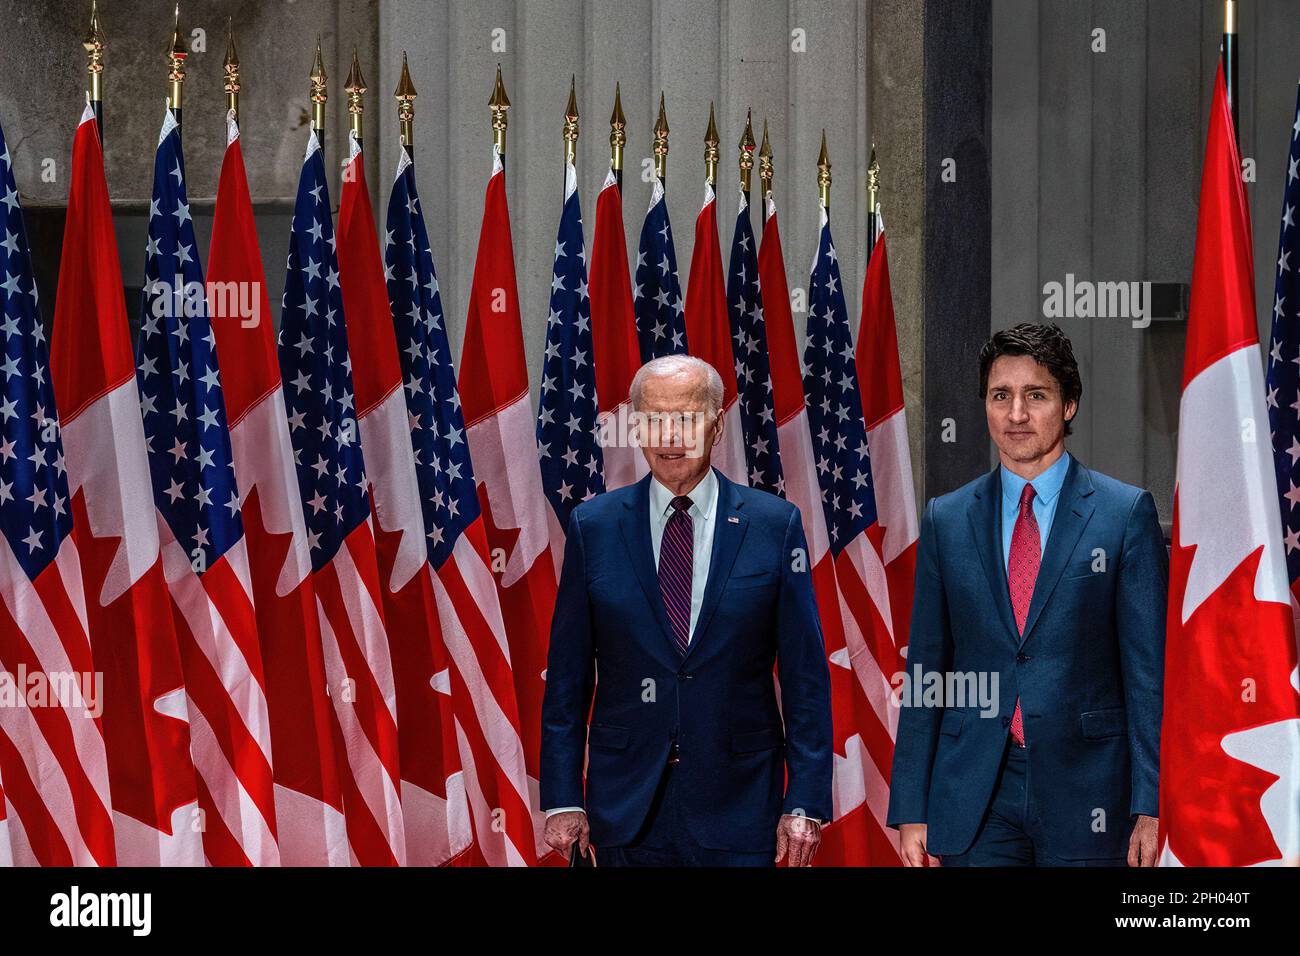 Ottawa, Canada. 24th Mar, 2023. U.S. President Joe Biden and Canadian Prime Minister Justin Trudeau seen prior to a joint press conference with journalists at the Sir John A. Macdonald Building in Ottawa. This is the first official visit that the American president has made to Canada since becoming president. Though visits between elected presidents and the allied country typically take place sooner, Biden's inaugural visit to the northern neighbor was delayed due to COVID-19 travel restrictions. Credit: SOPA Images Limited/Alamy Live News Stock Photo